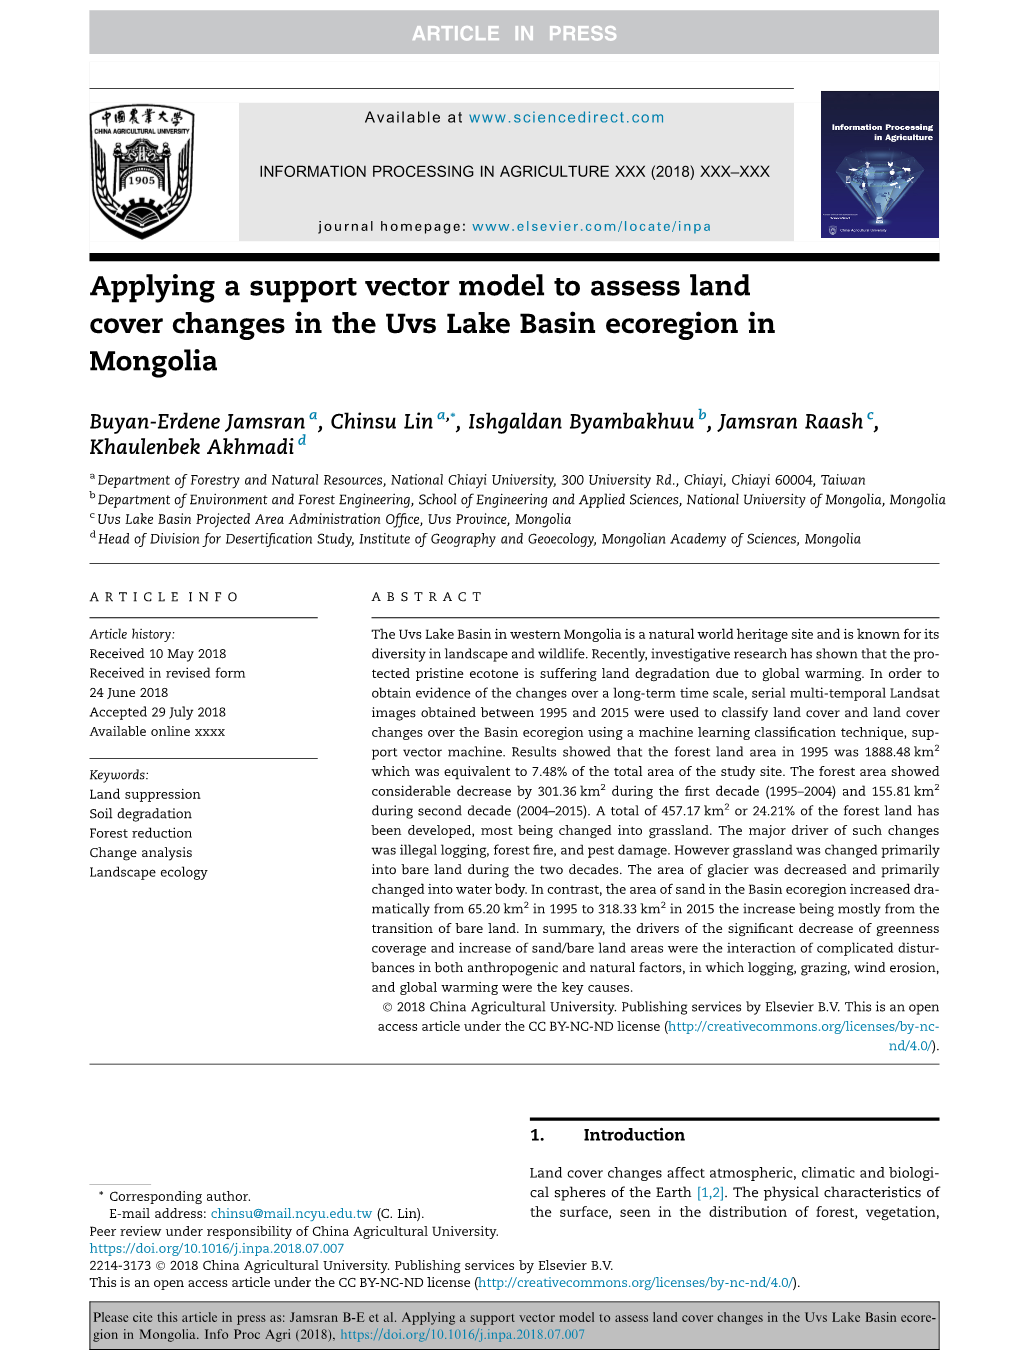 Applying a Support Vector Model to Assess Land Cover Changes in the Uvs Lake Basin Ecoregion in Mongolia